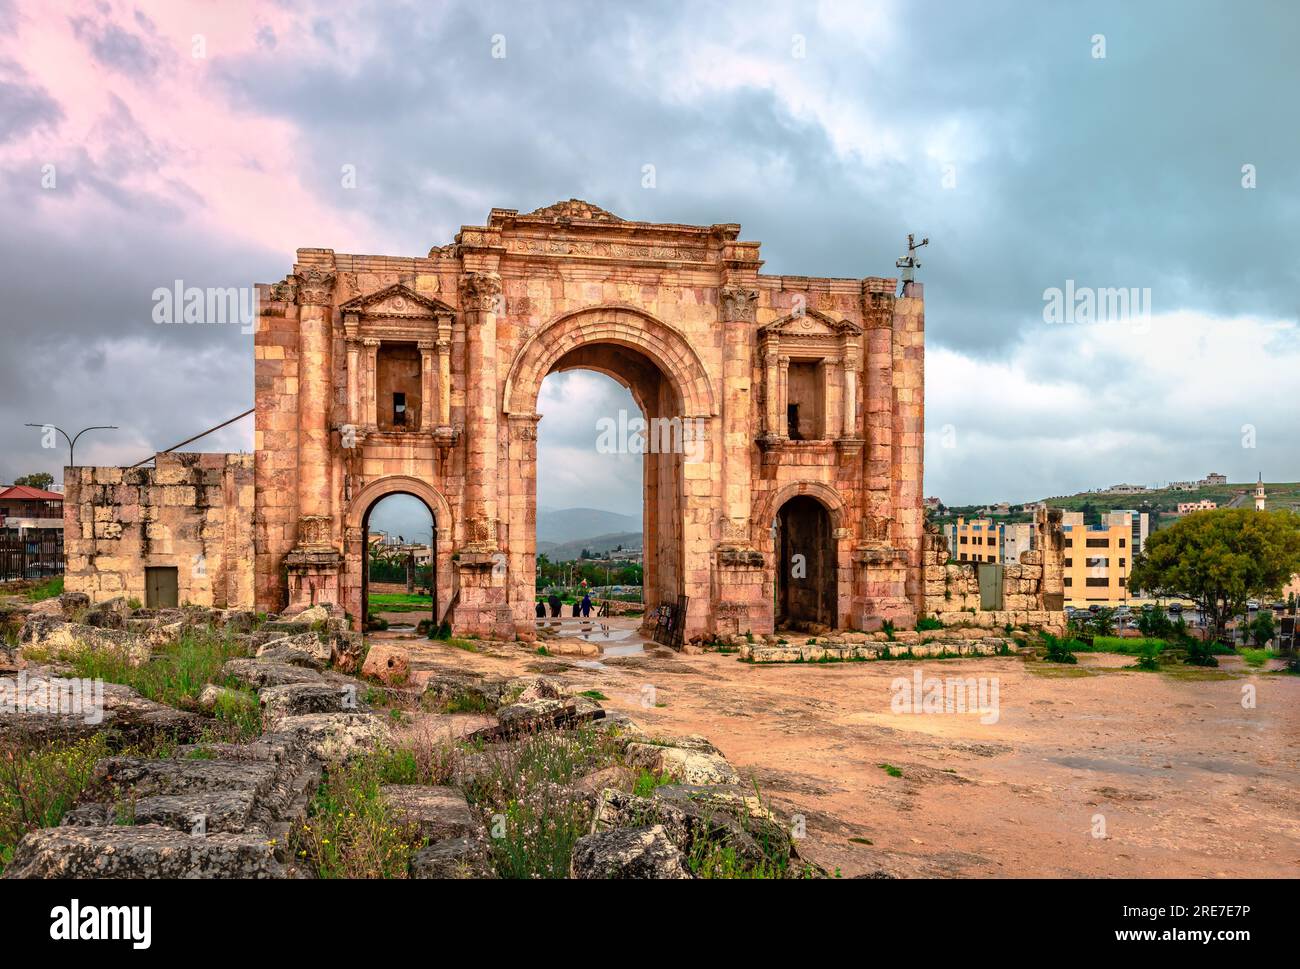 Hadrian’s Arch in Jerash, Jordan. Built in 129AD, this gate marks the ancient city’s boundaries. View from inside the ancient city. Stock Photo